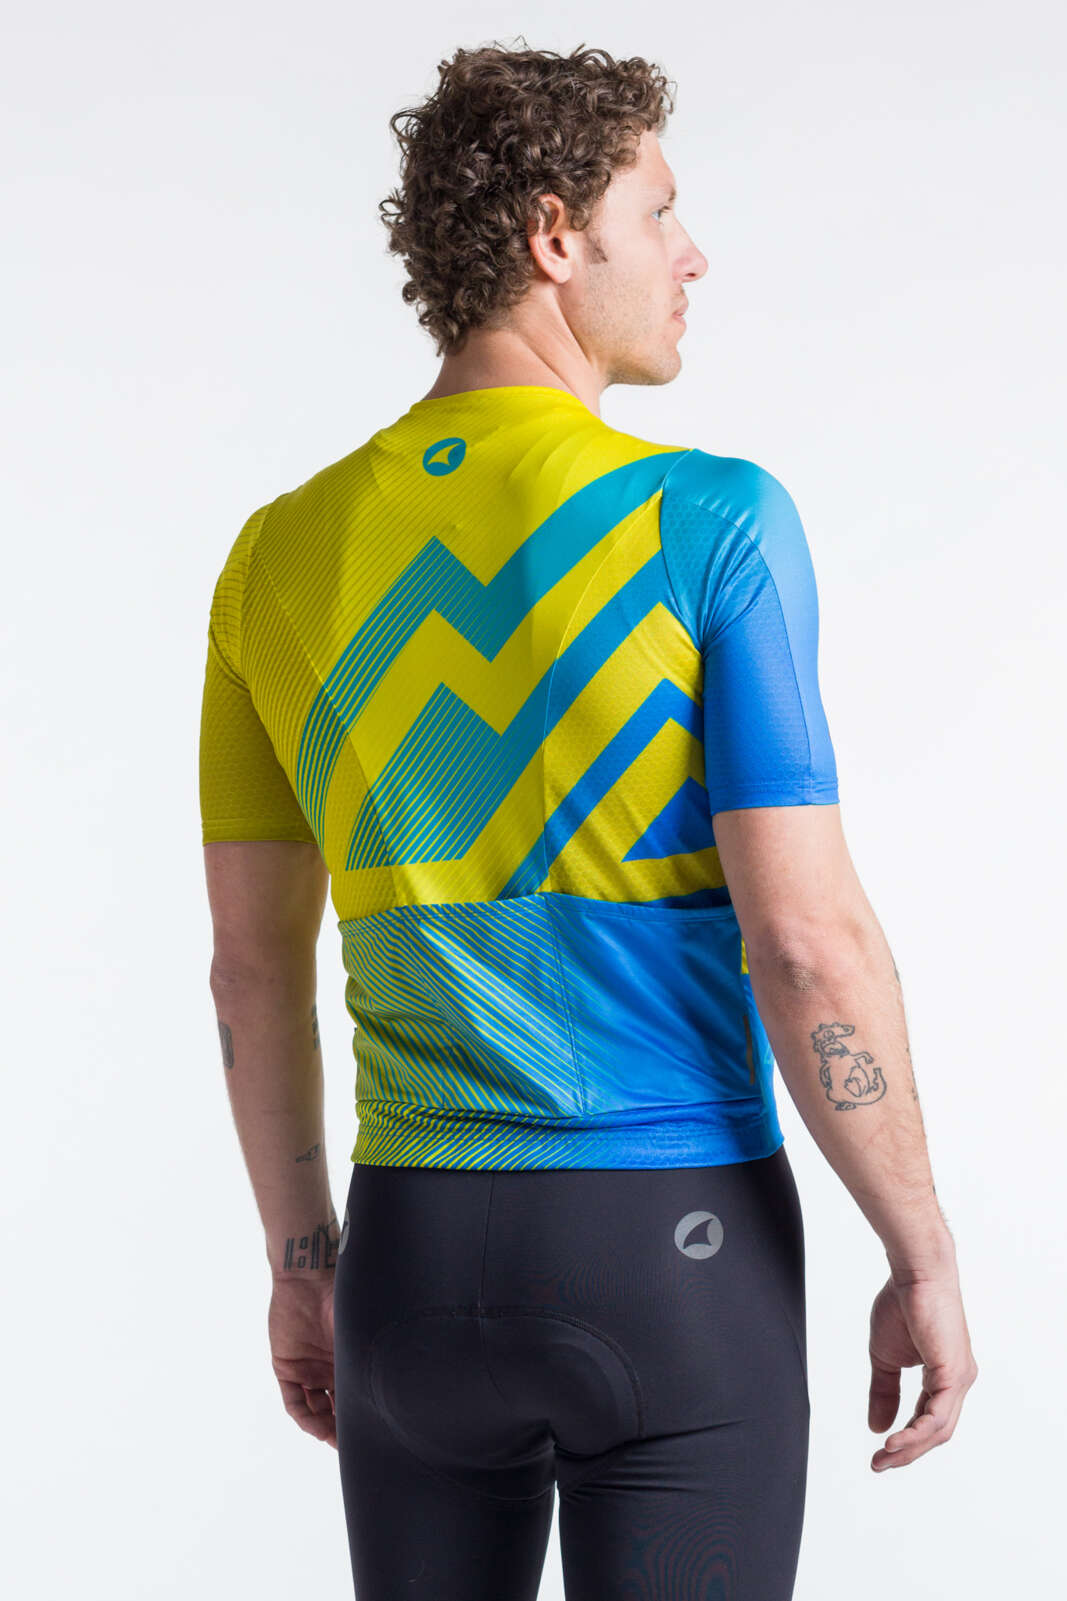 Men's Best Yellow Cycling Jersey - Summit Pitch Back View